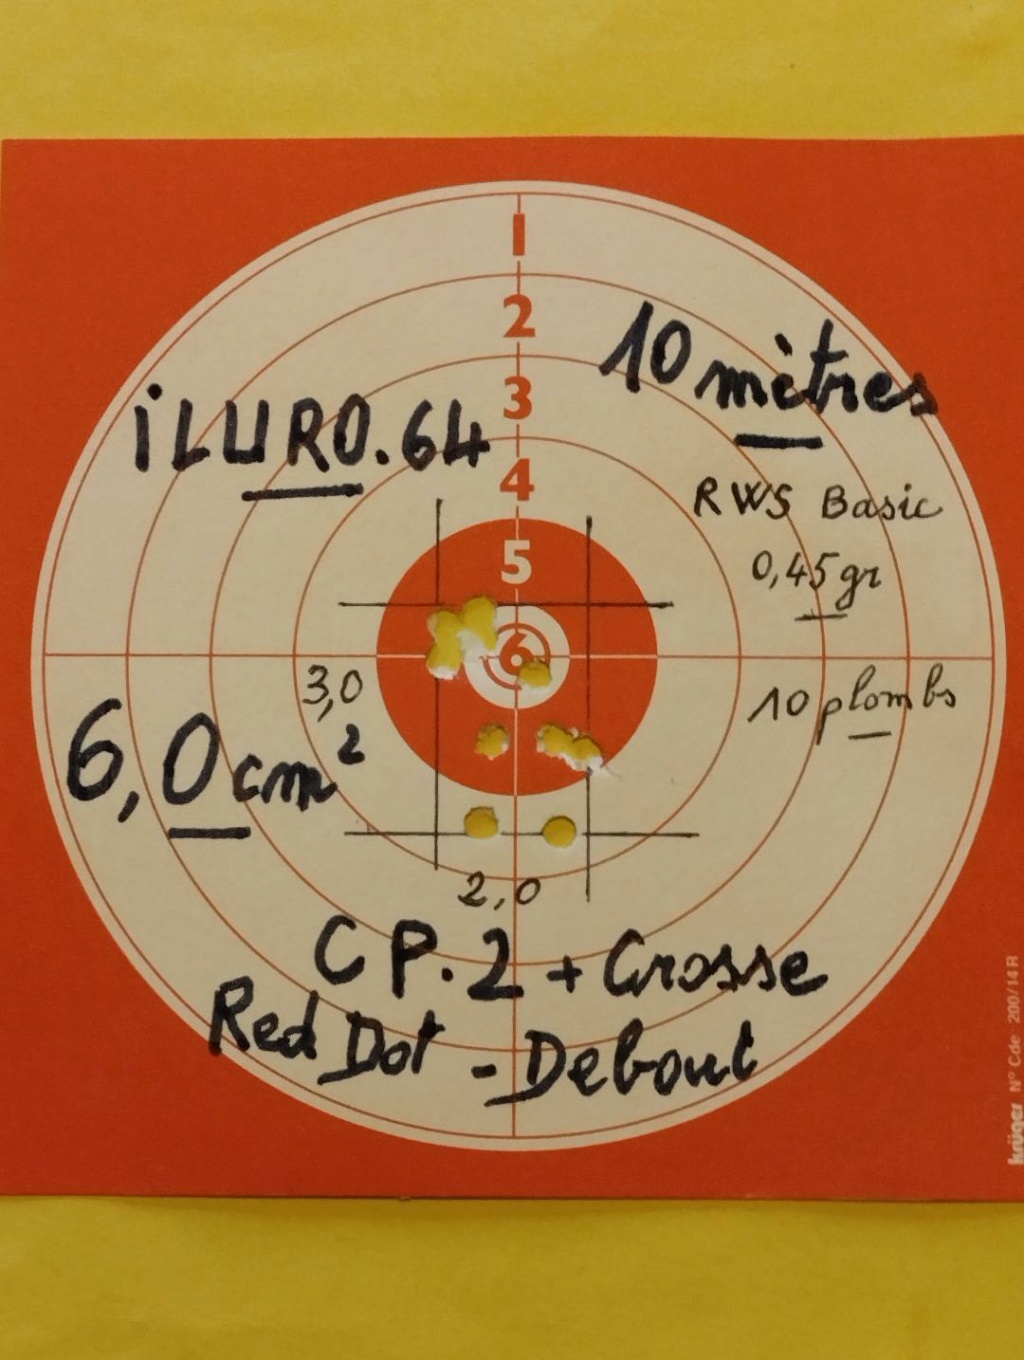 concours "Chasseur Moderne" Fusil Debout Red dot/lunette 10m_cp11